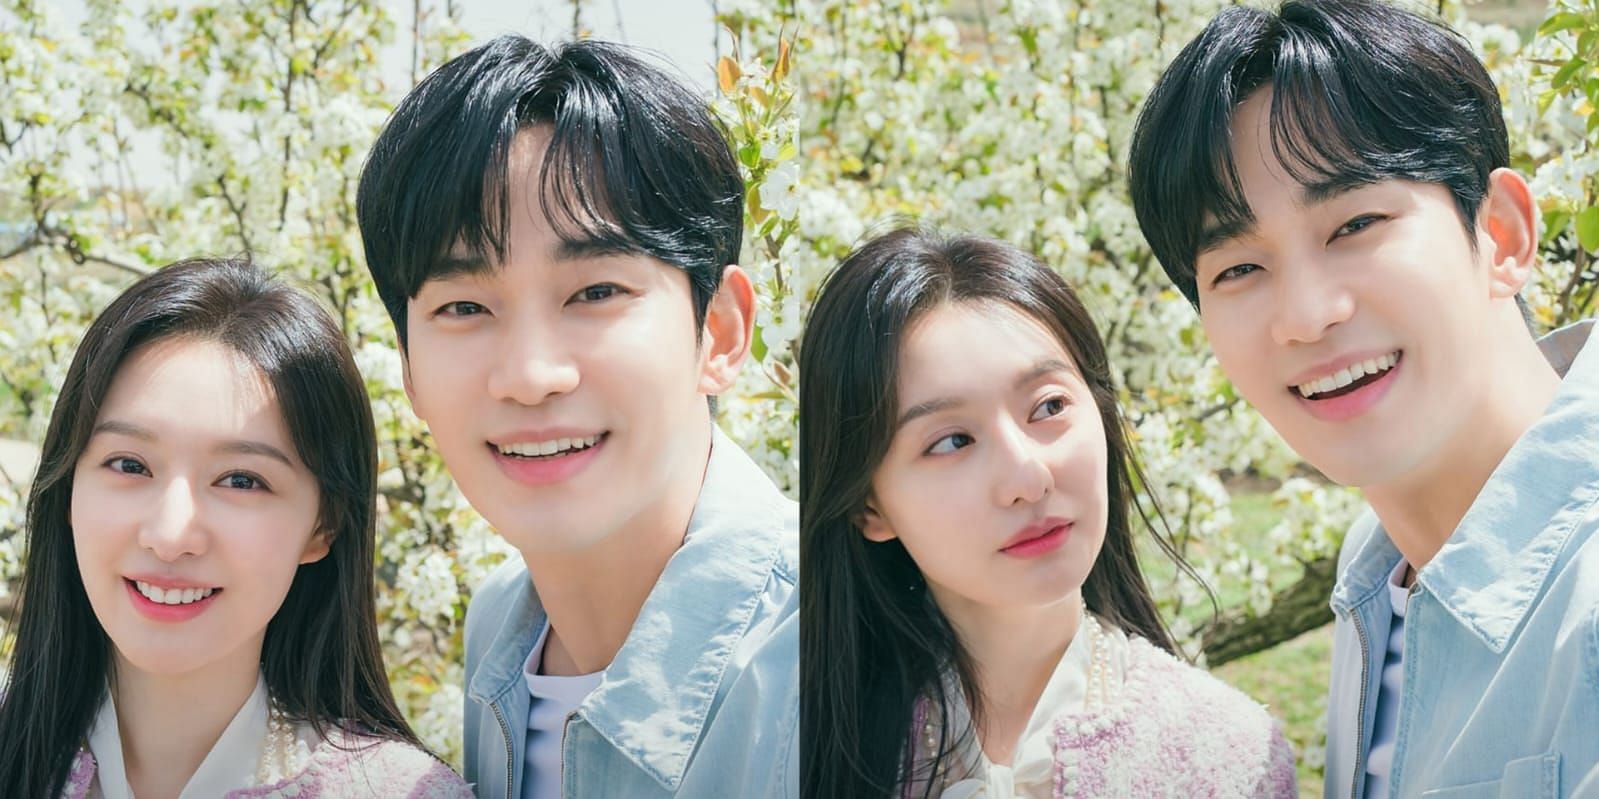 Queen of Tears breaks records to become the first K-drama to surpass 1 Billion views in tvN